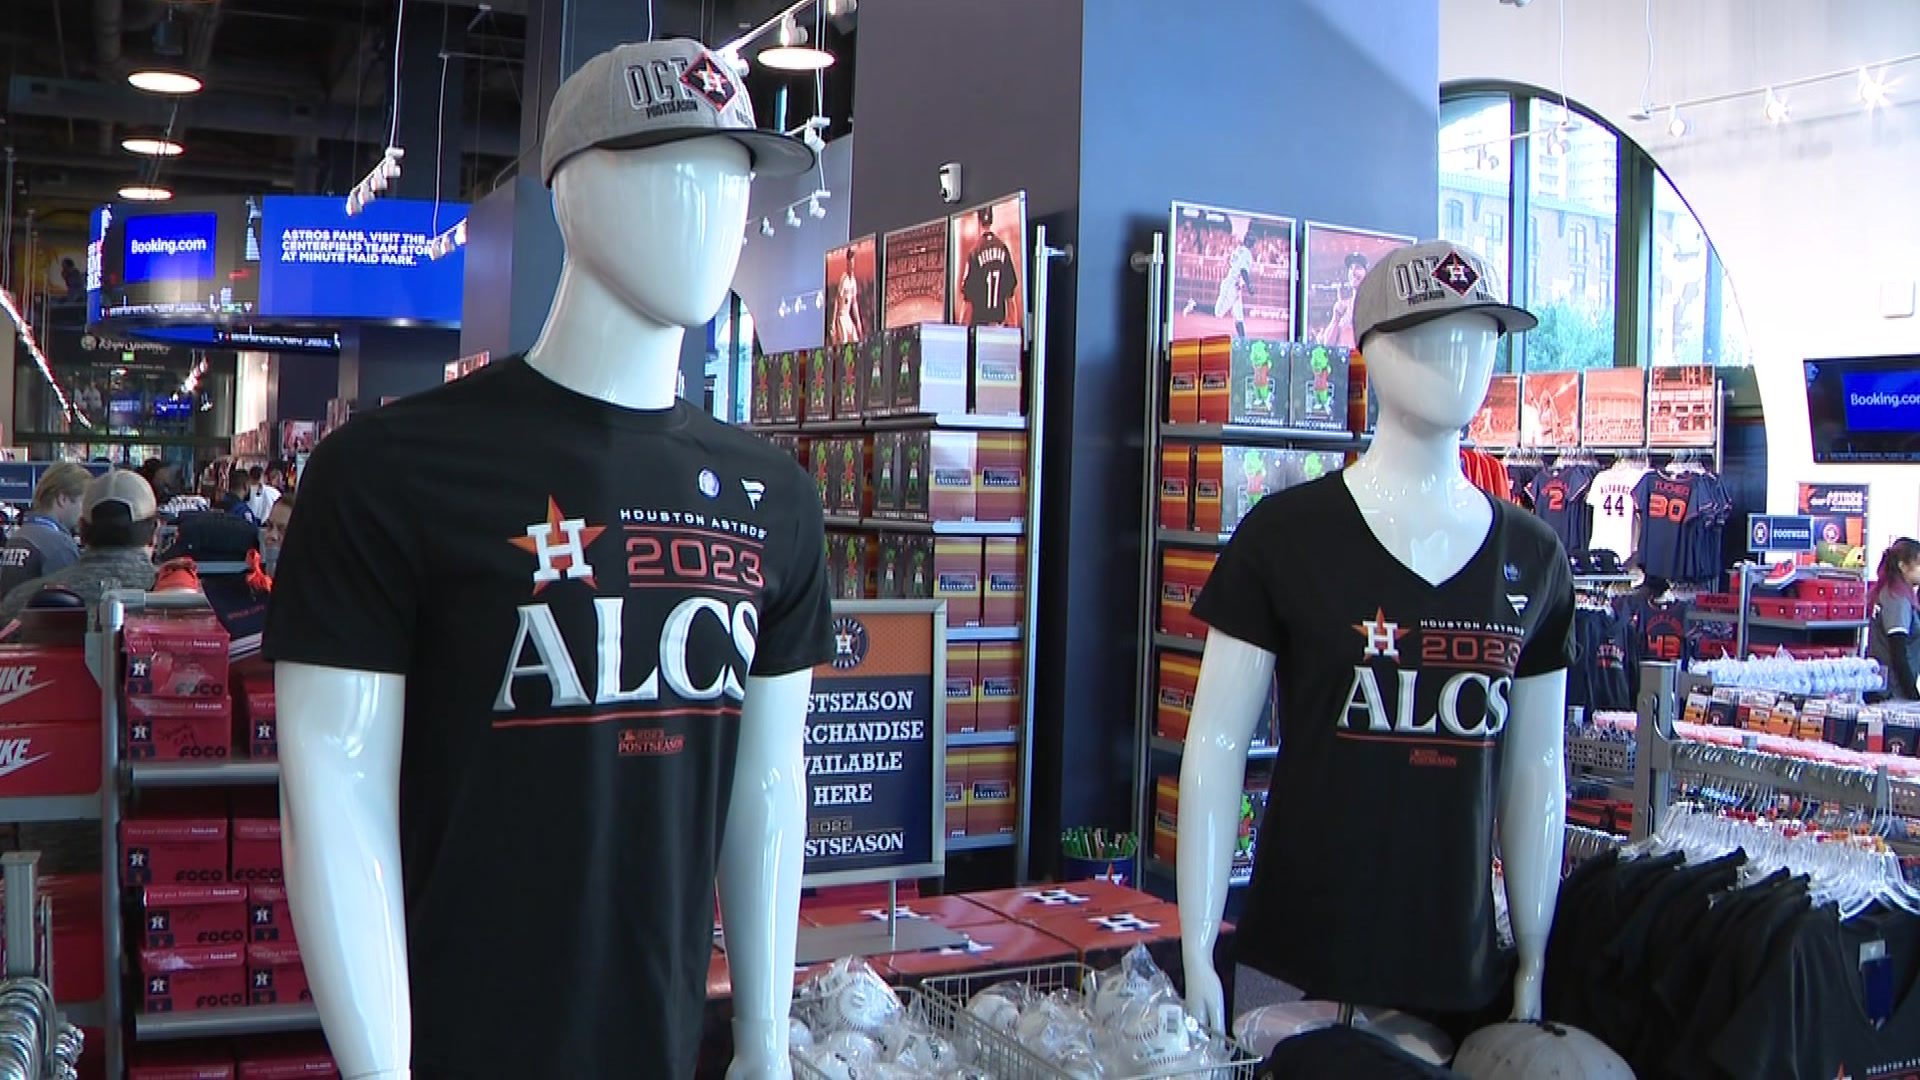 Get your gear, 'Stros! Where to get ALDS championship gear in Houston